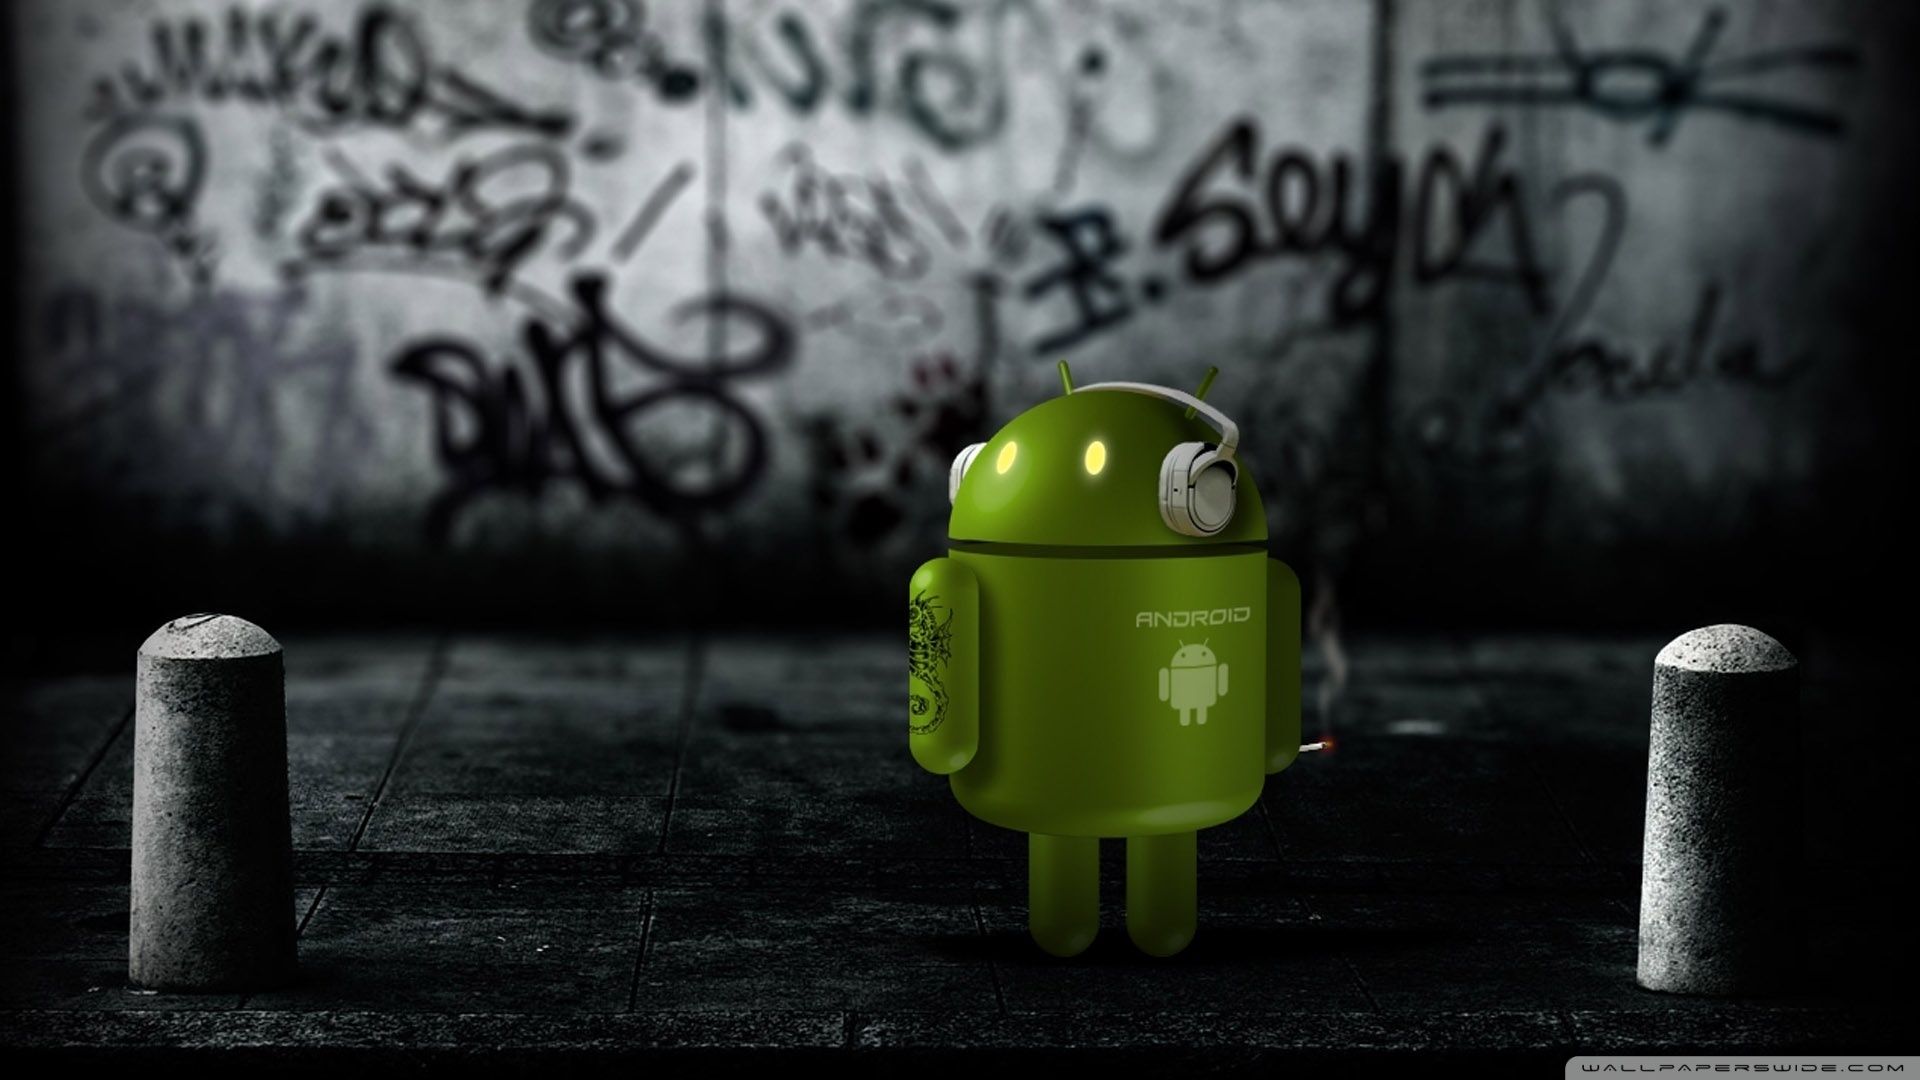 Android Robot Listening To Music Wallpaper Full HD [1920x1080 ...